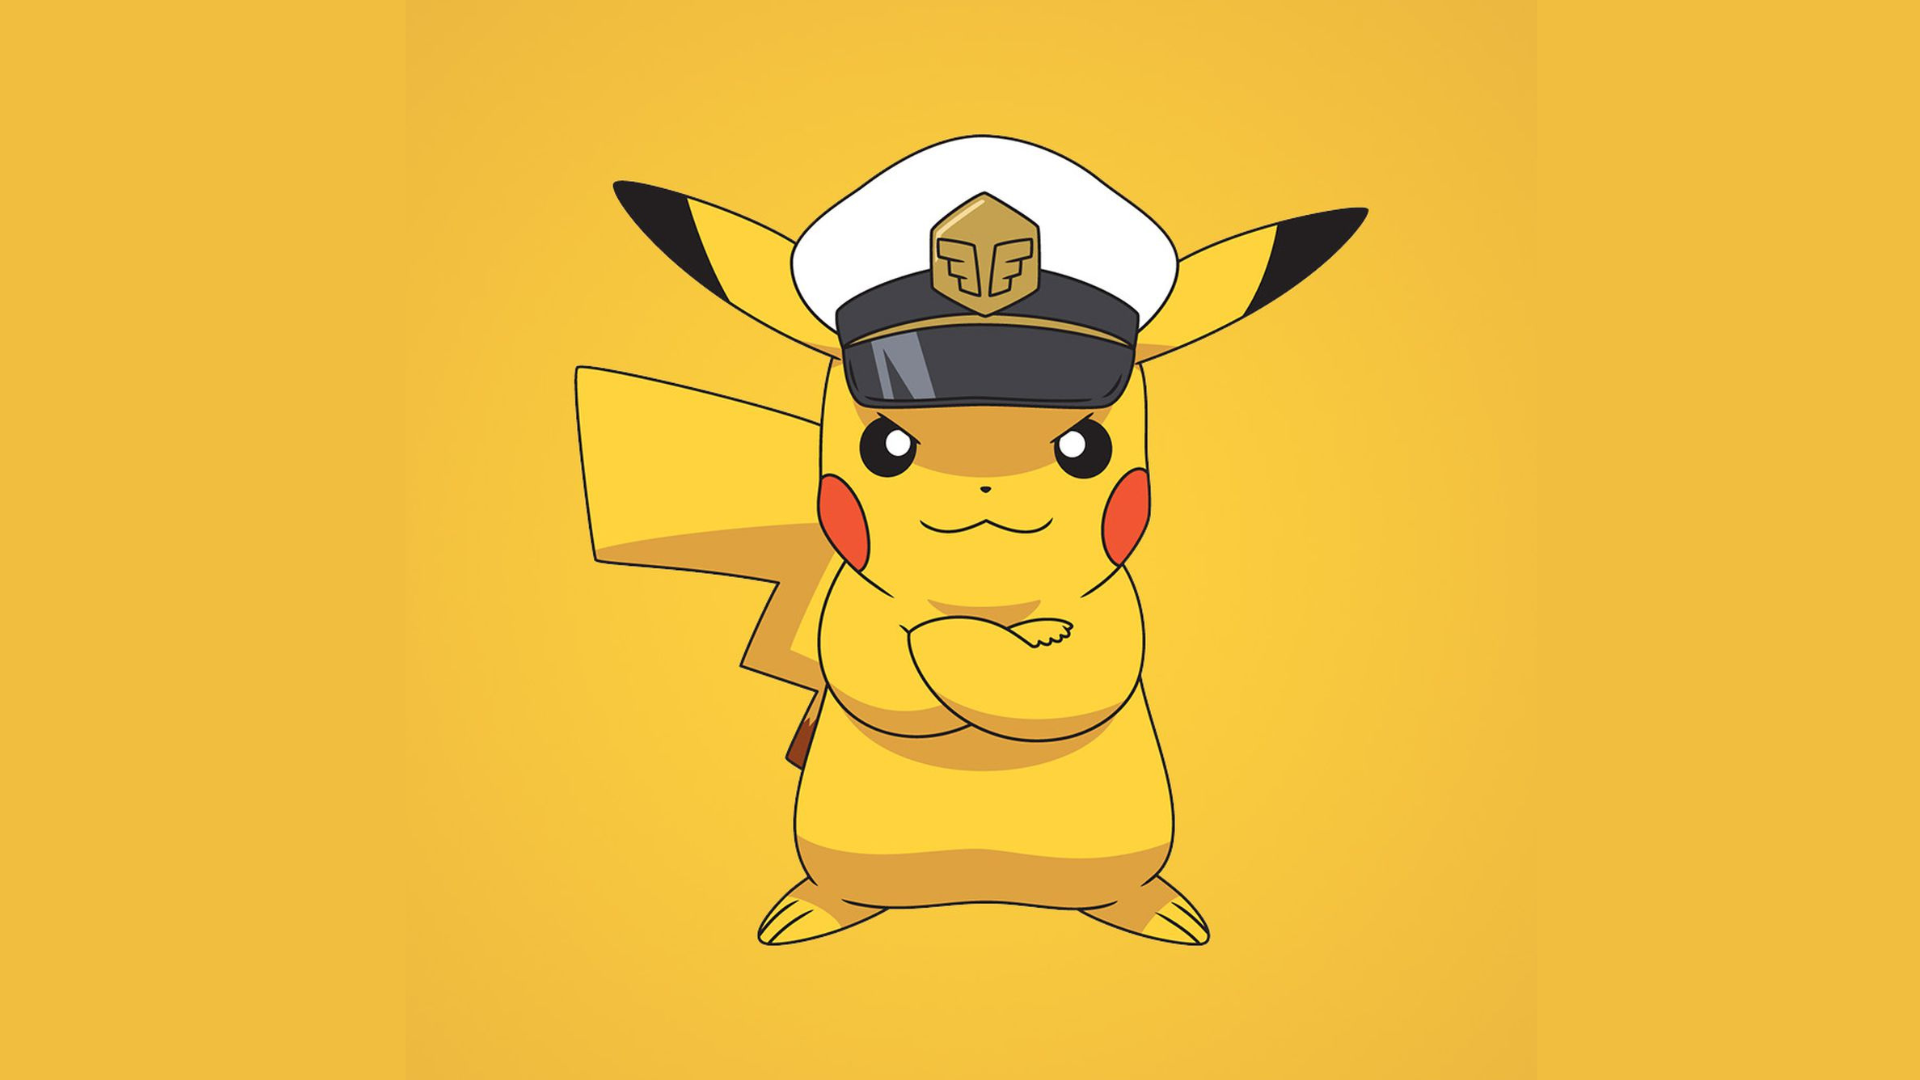 New Pokemon anime characters include Captain Pikachu 